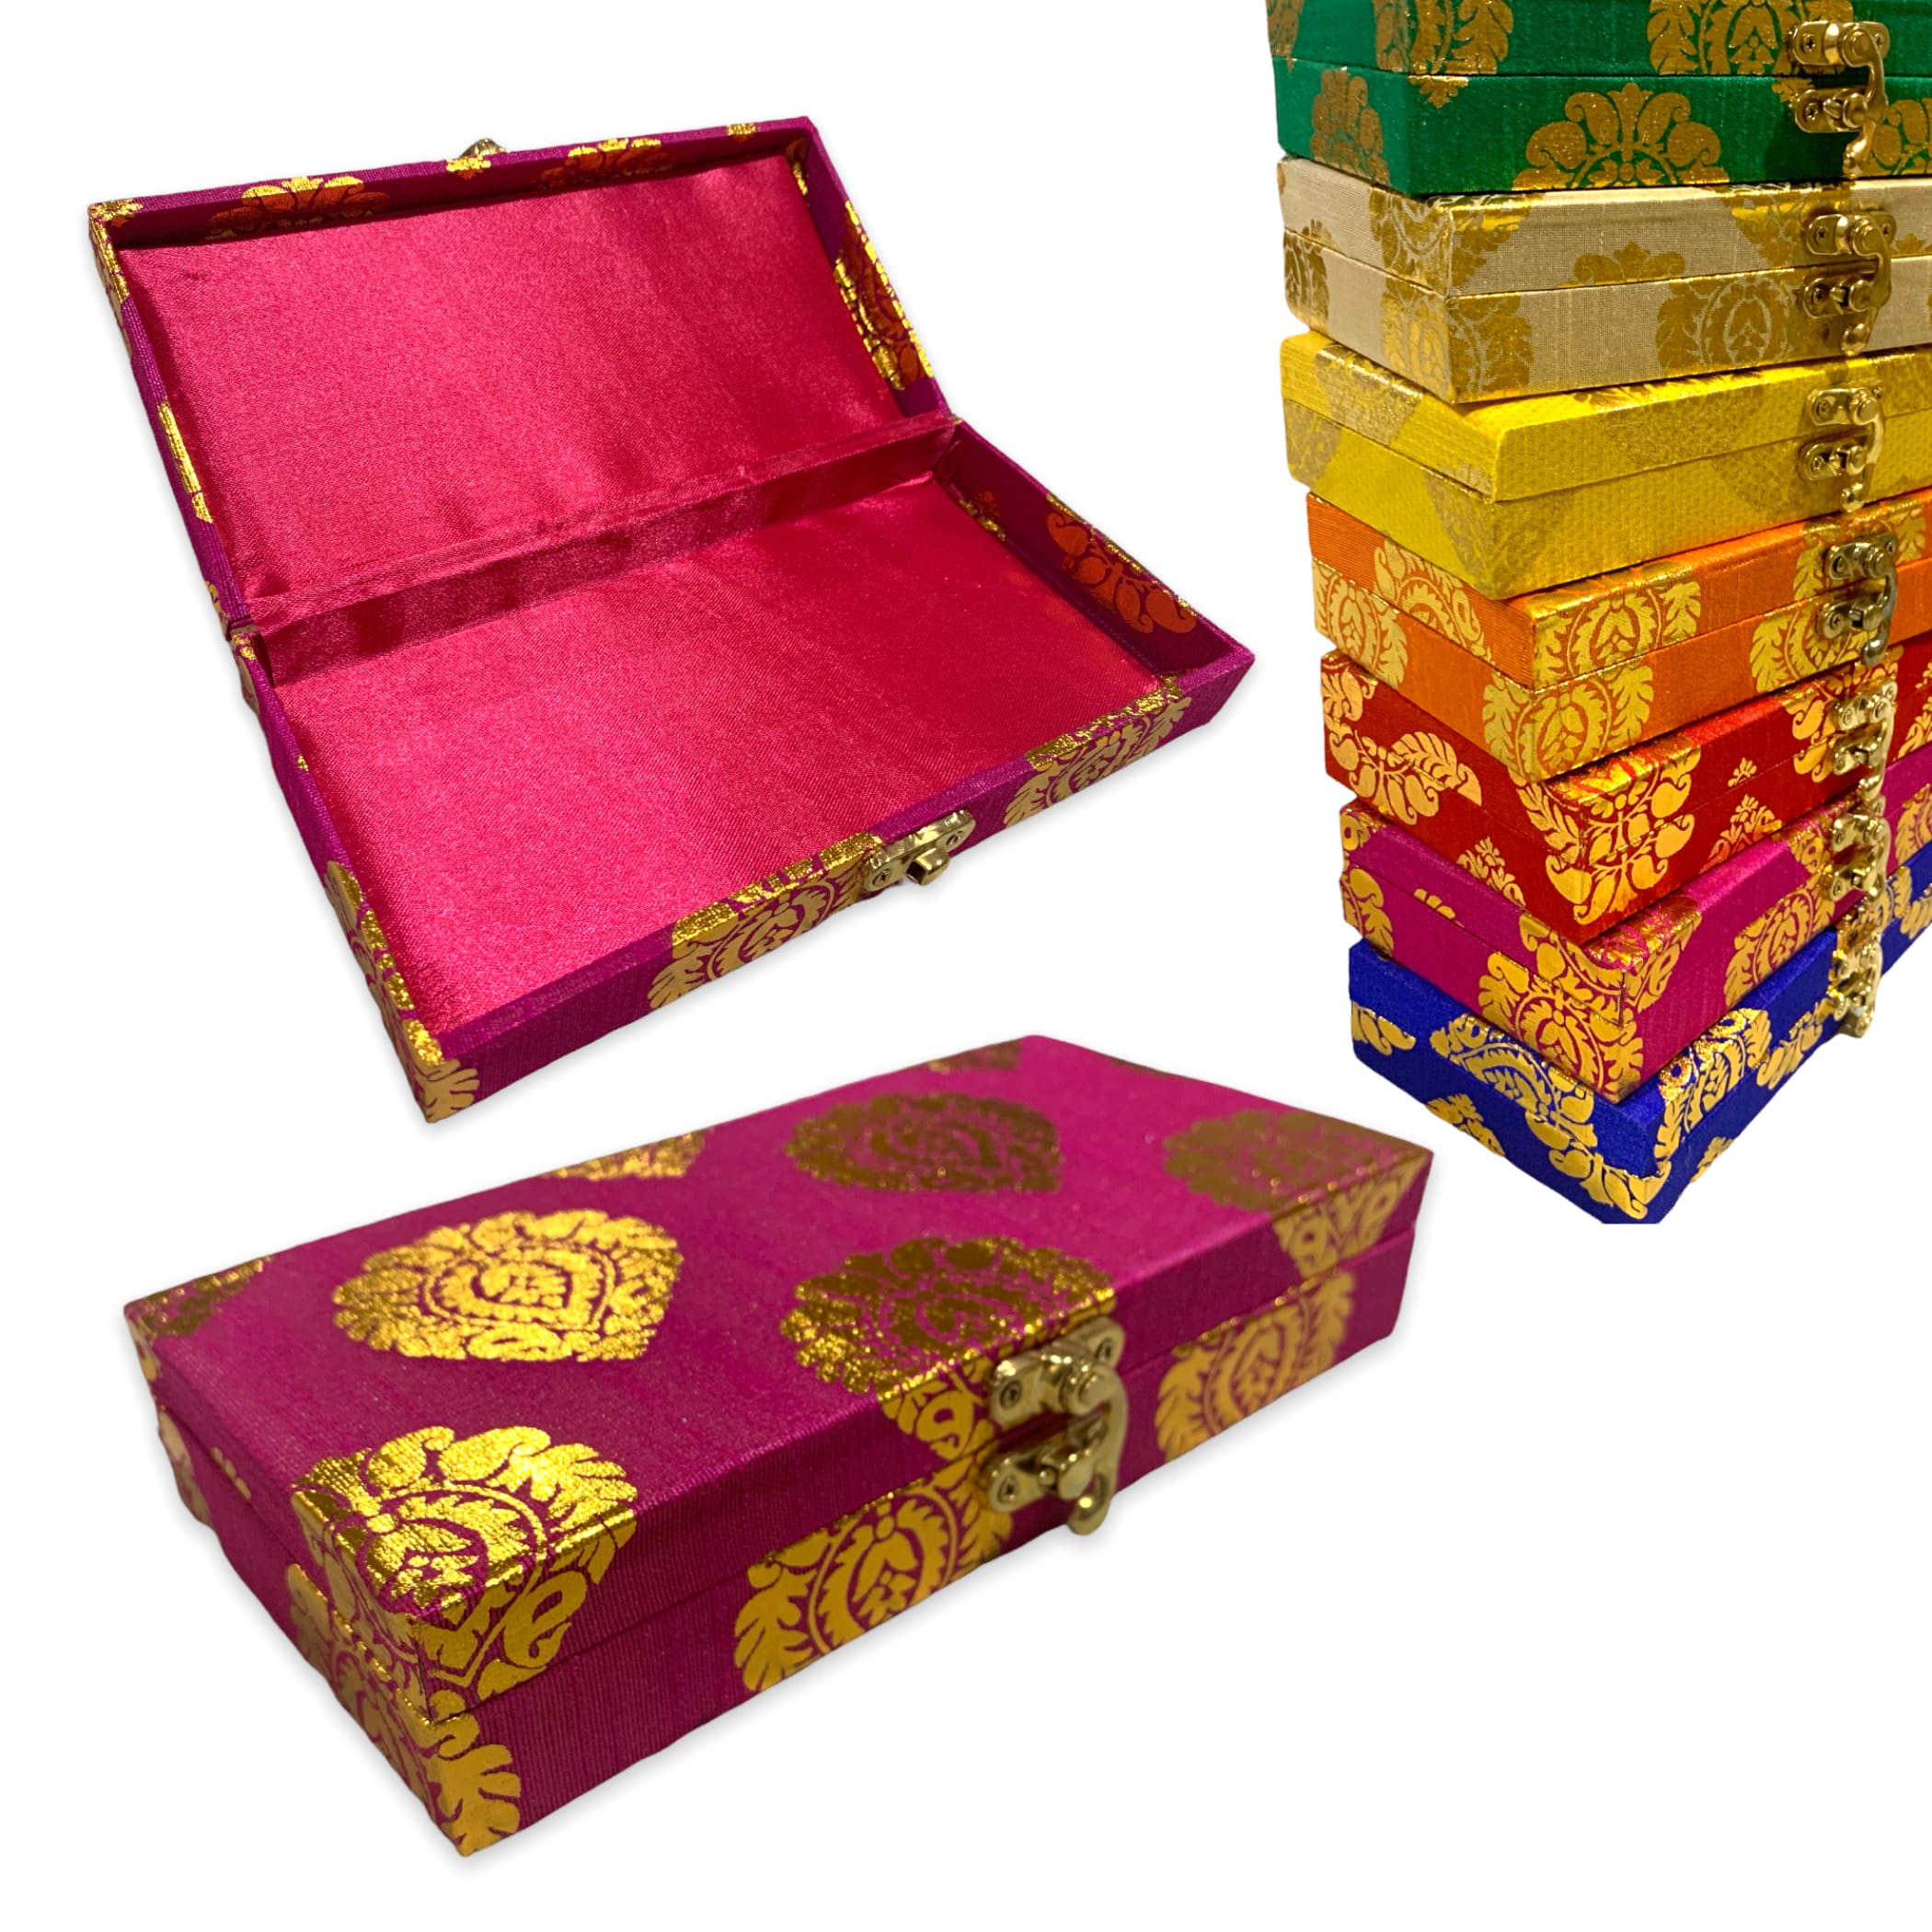 Brocade gift boxes(8x4x1.5 inches) favor for indian muslim